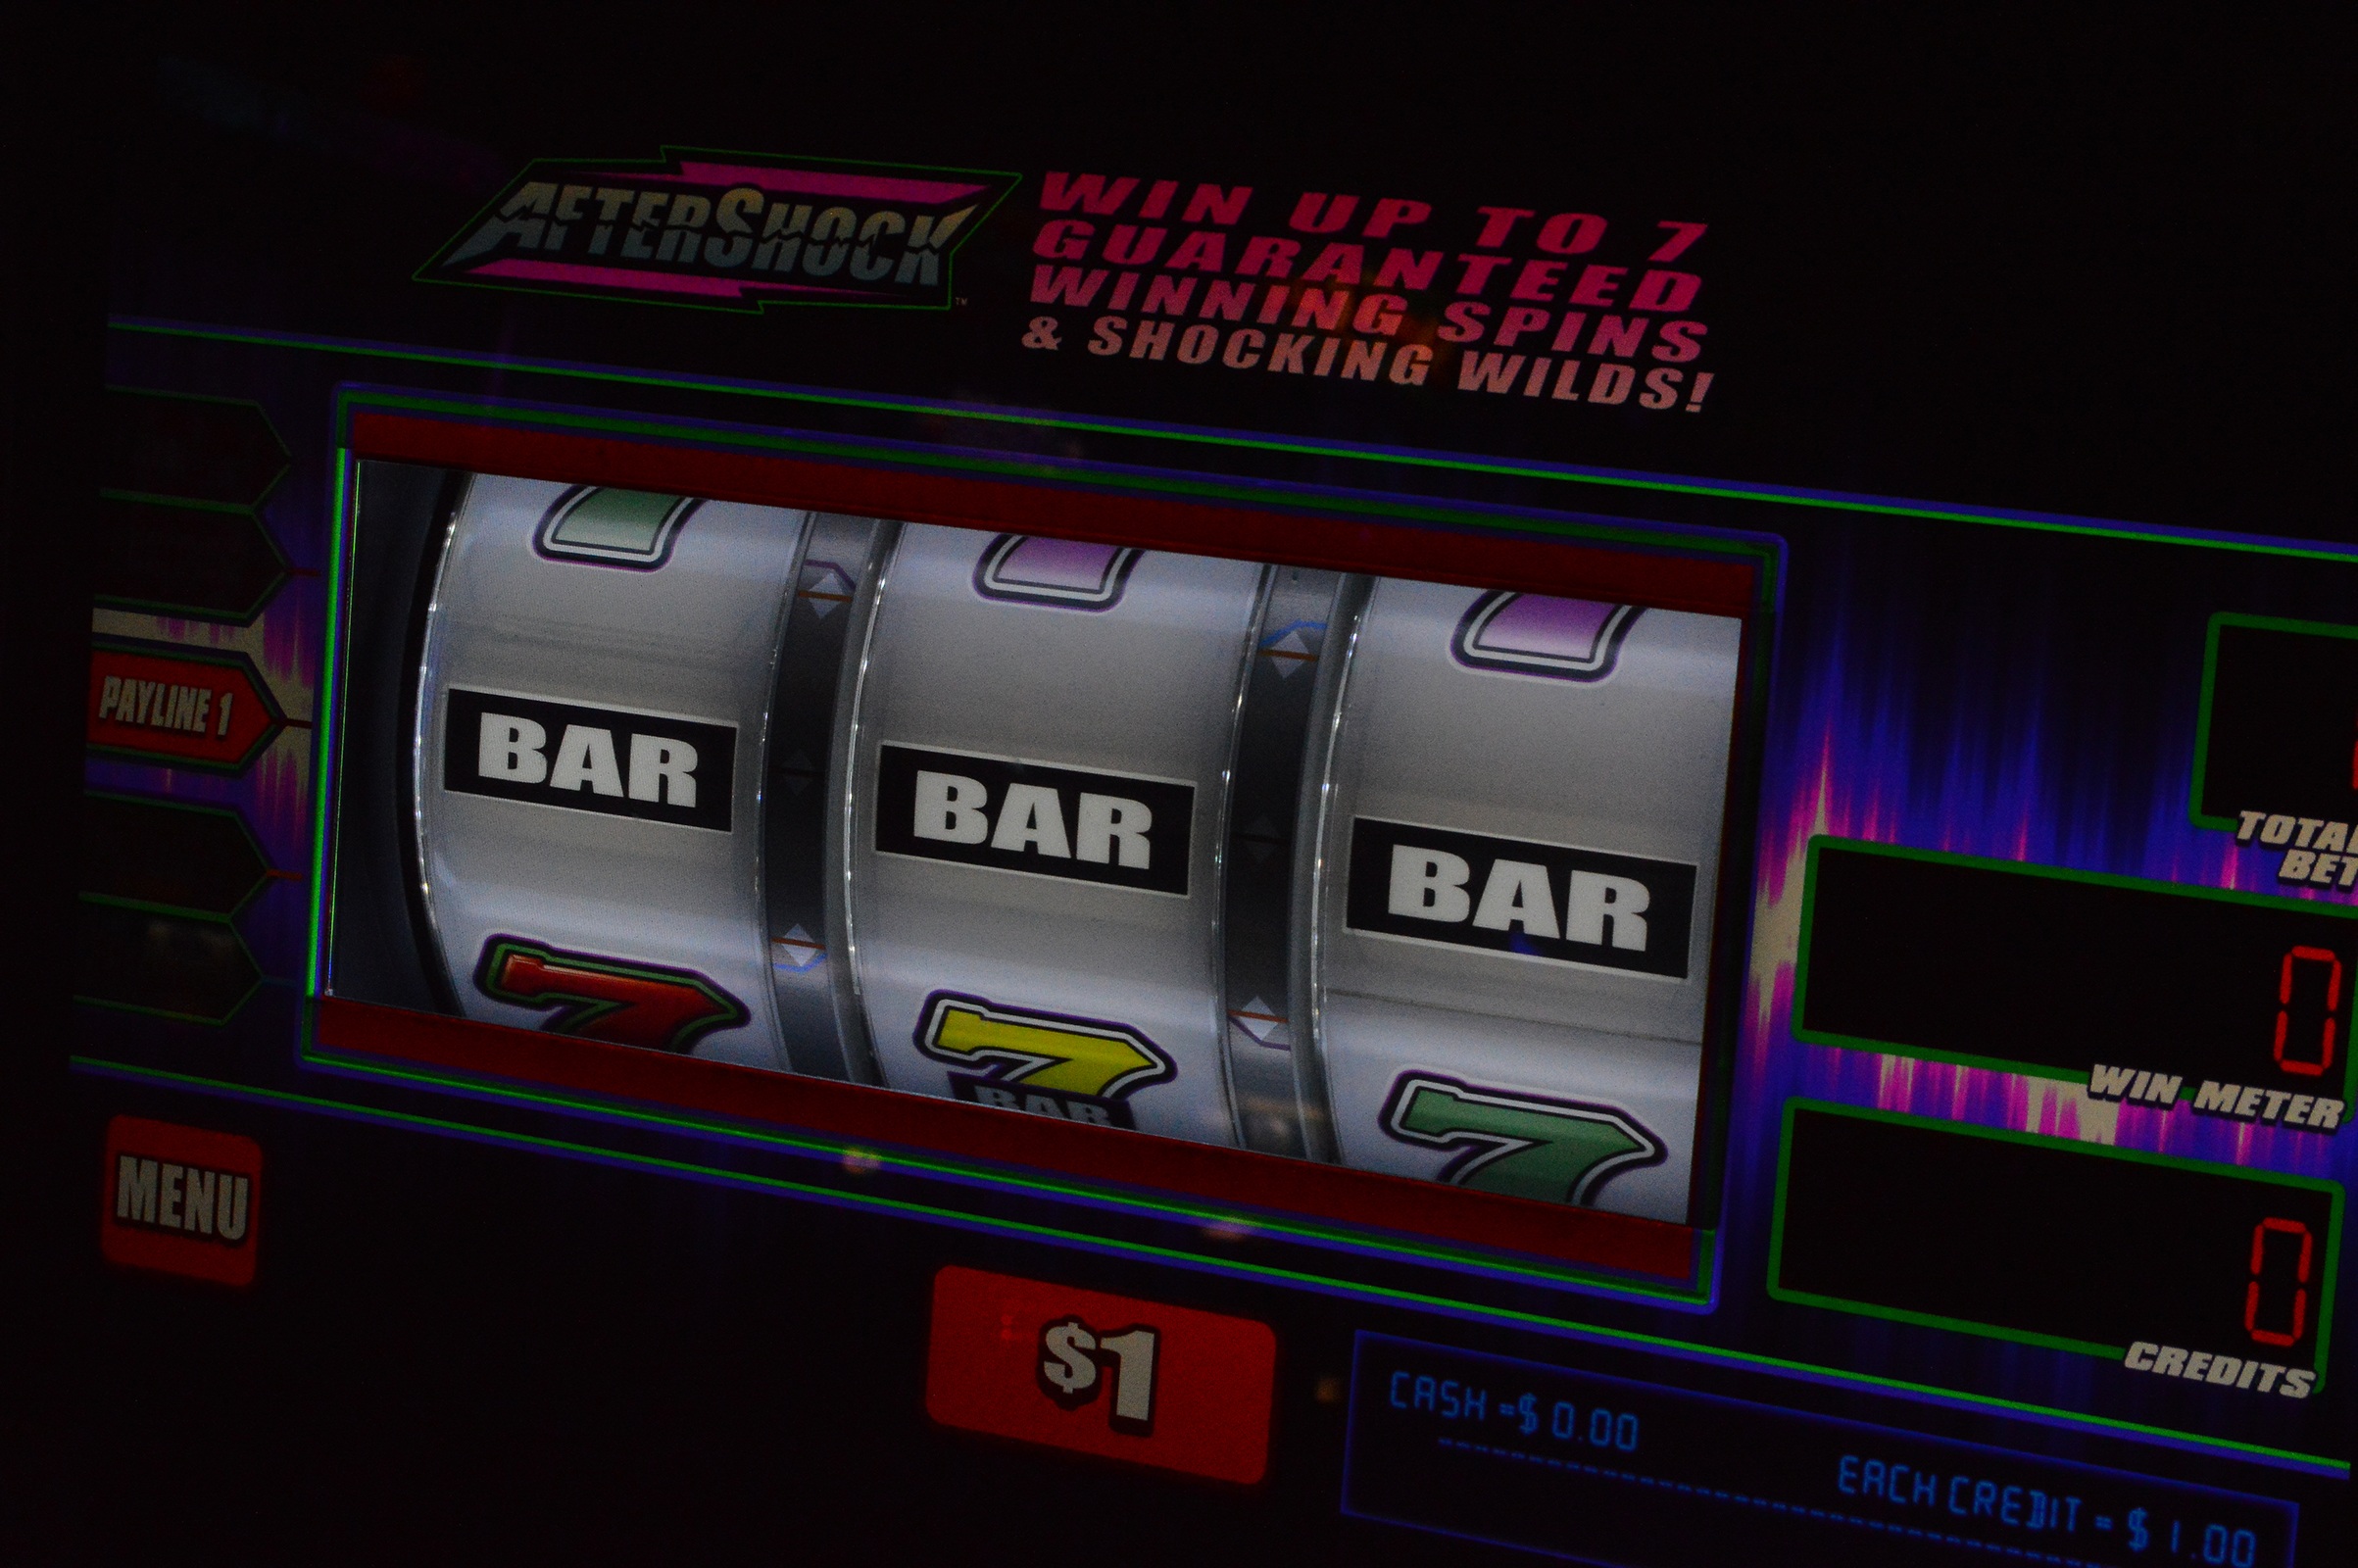 Slot machine that has never paid out